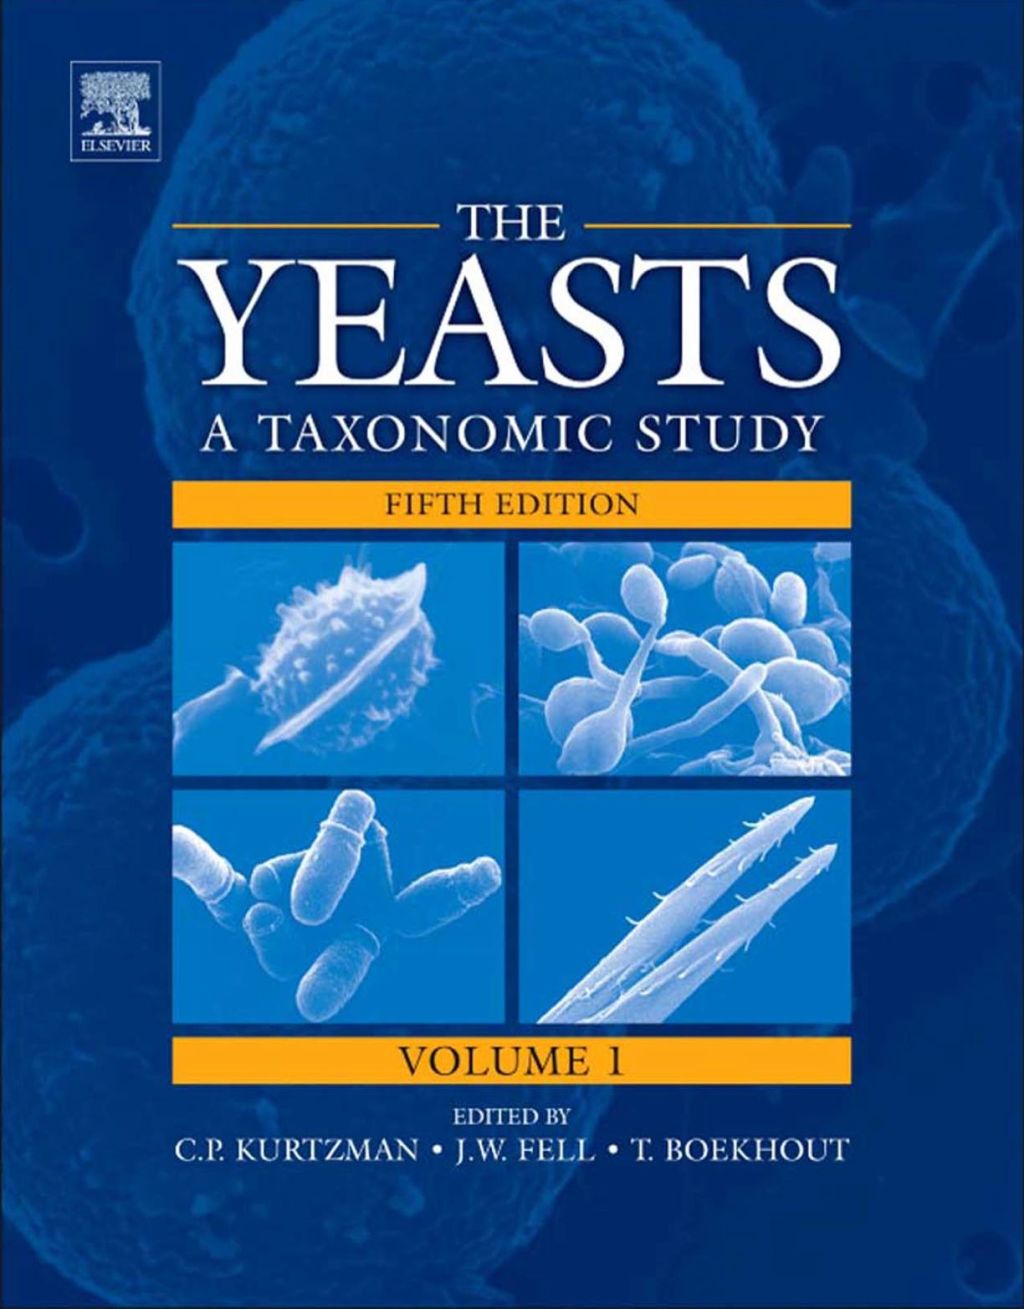 The Yeasts: A Taxonomic Study - 5th Edition (eBook)